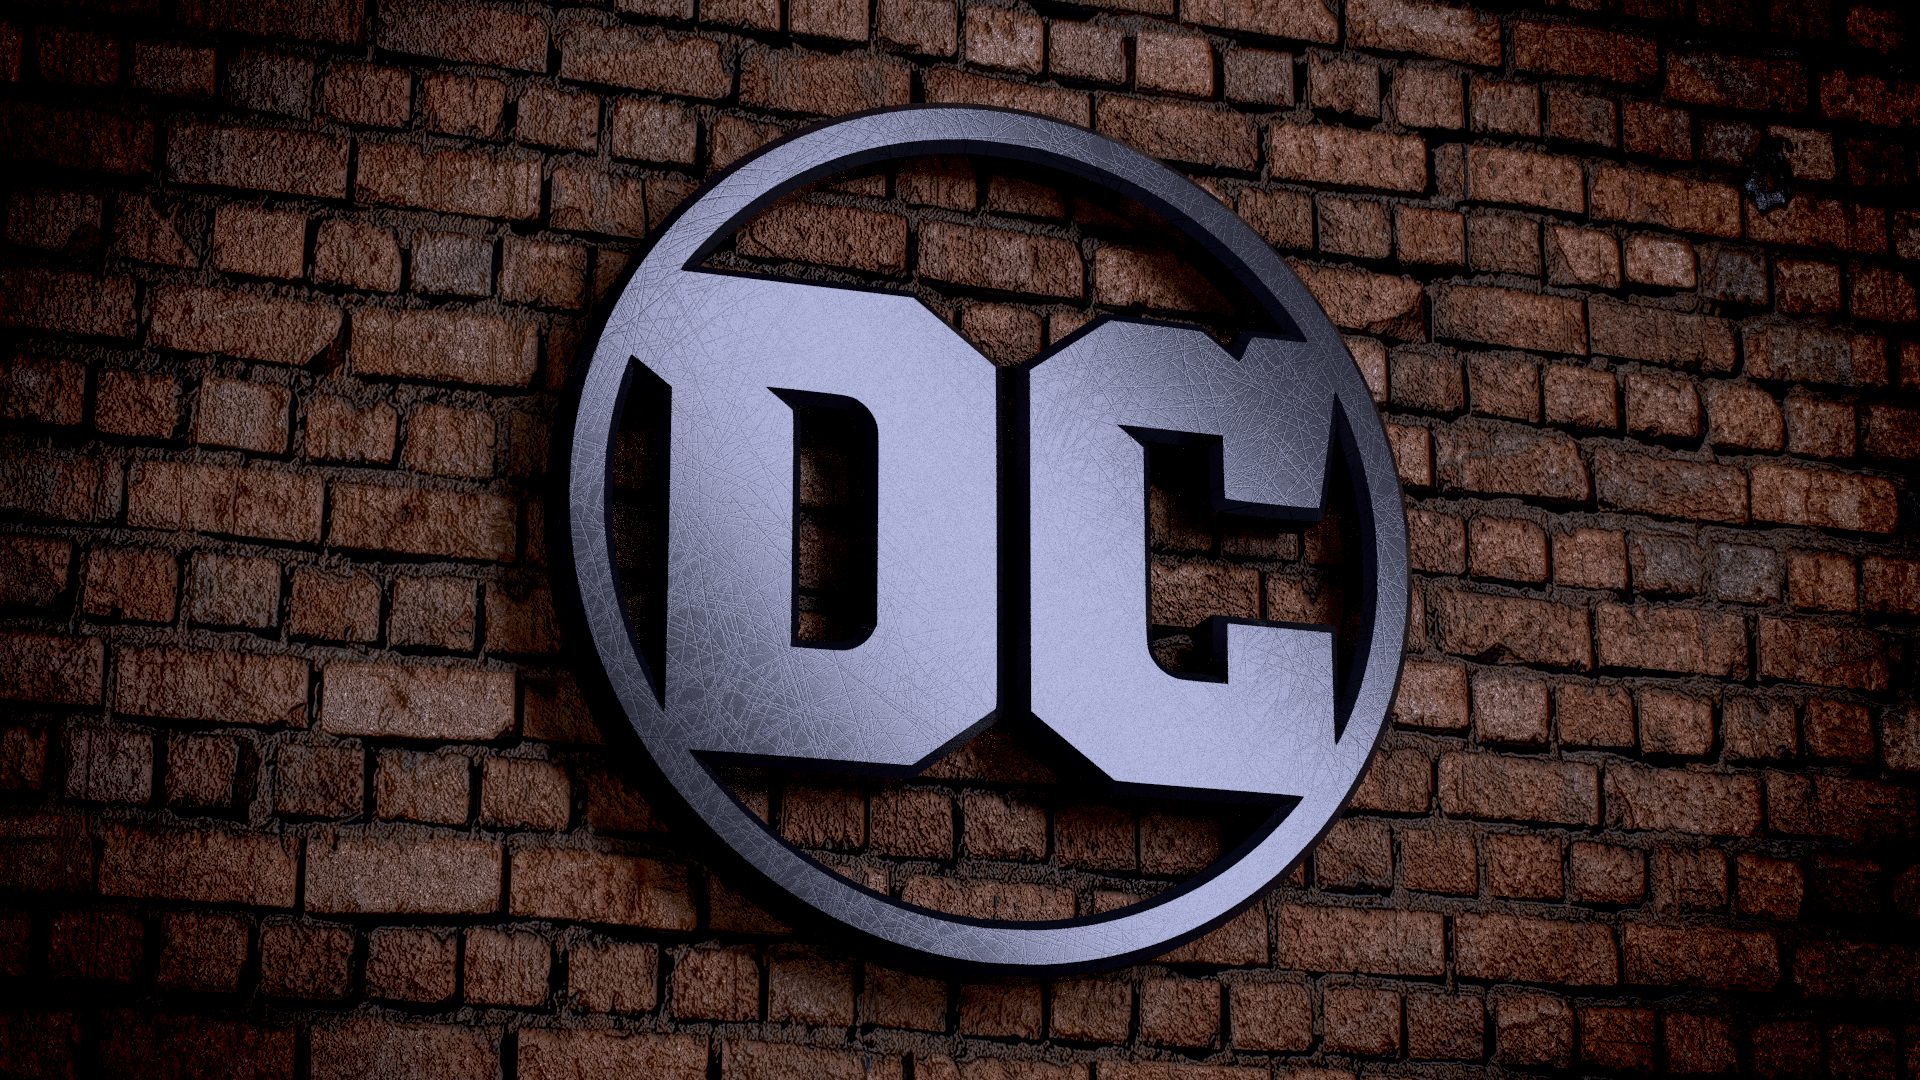 New DC Logo - 3D Renders I made Of The New DC Logo